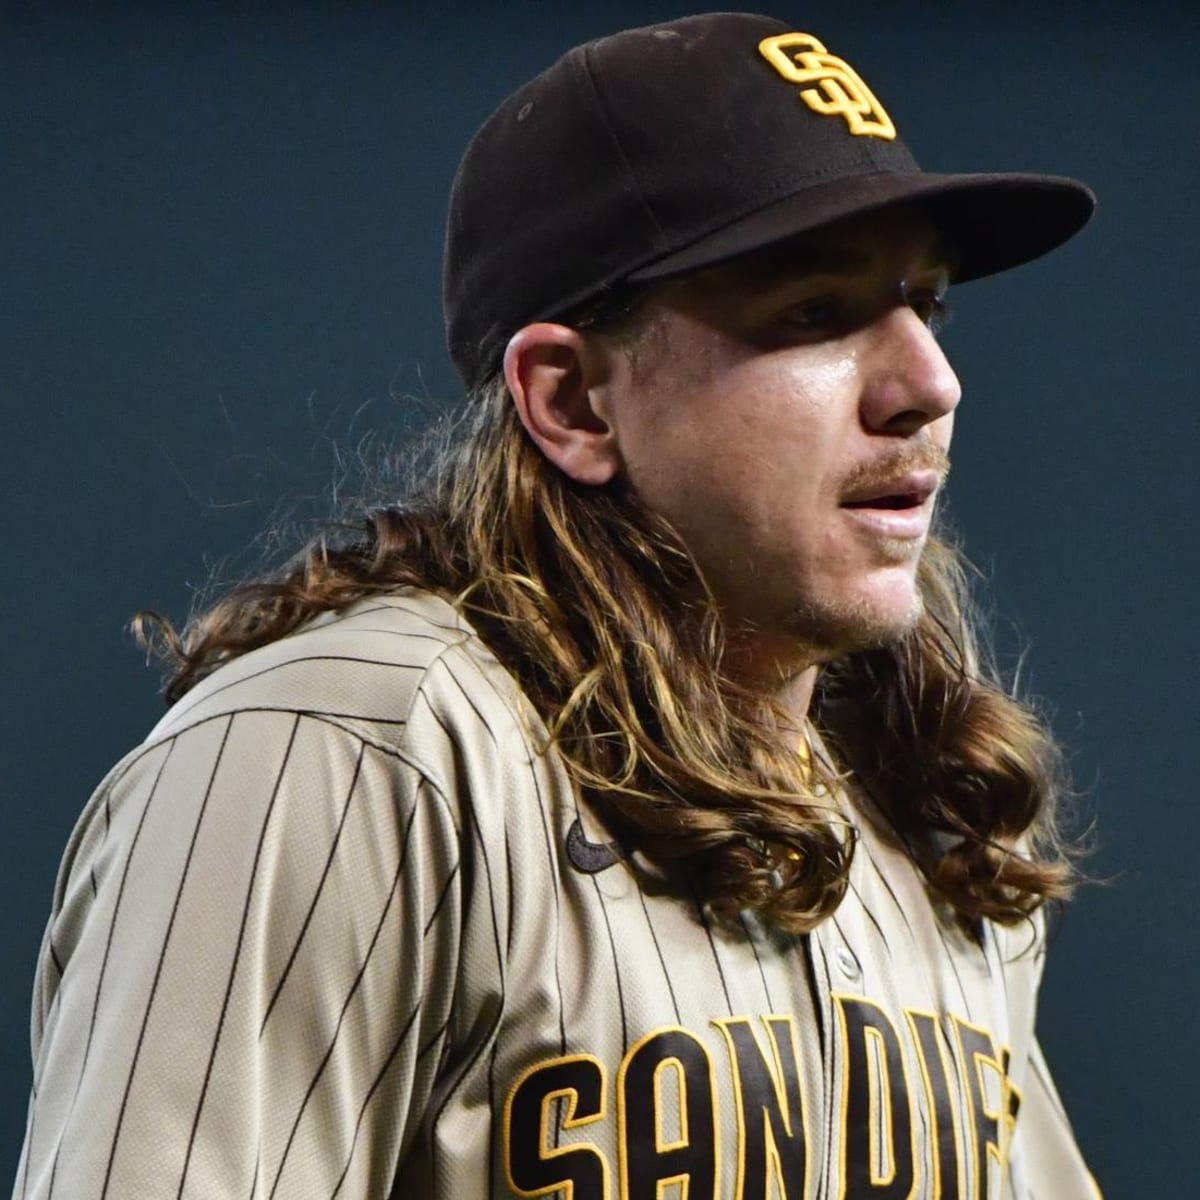 Mike Clevinger: When Mike Clevinger clashed with MLB host in an explosive  verbal bout